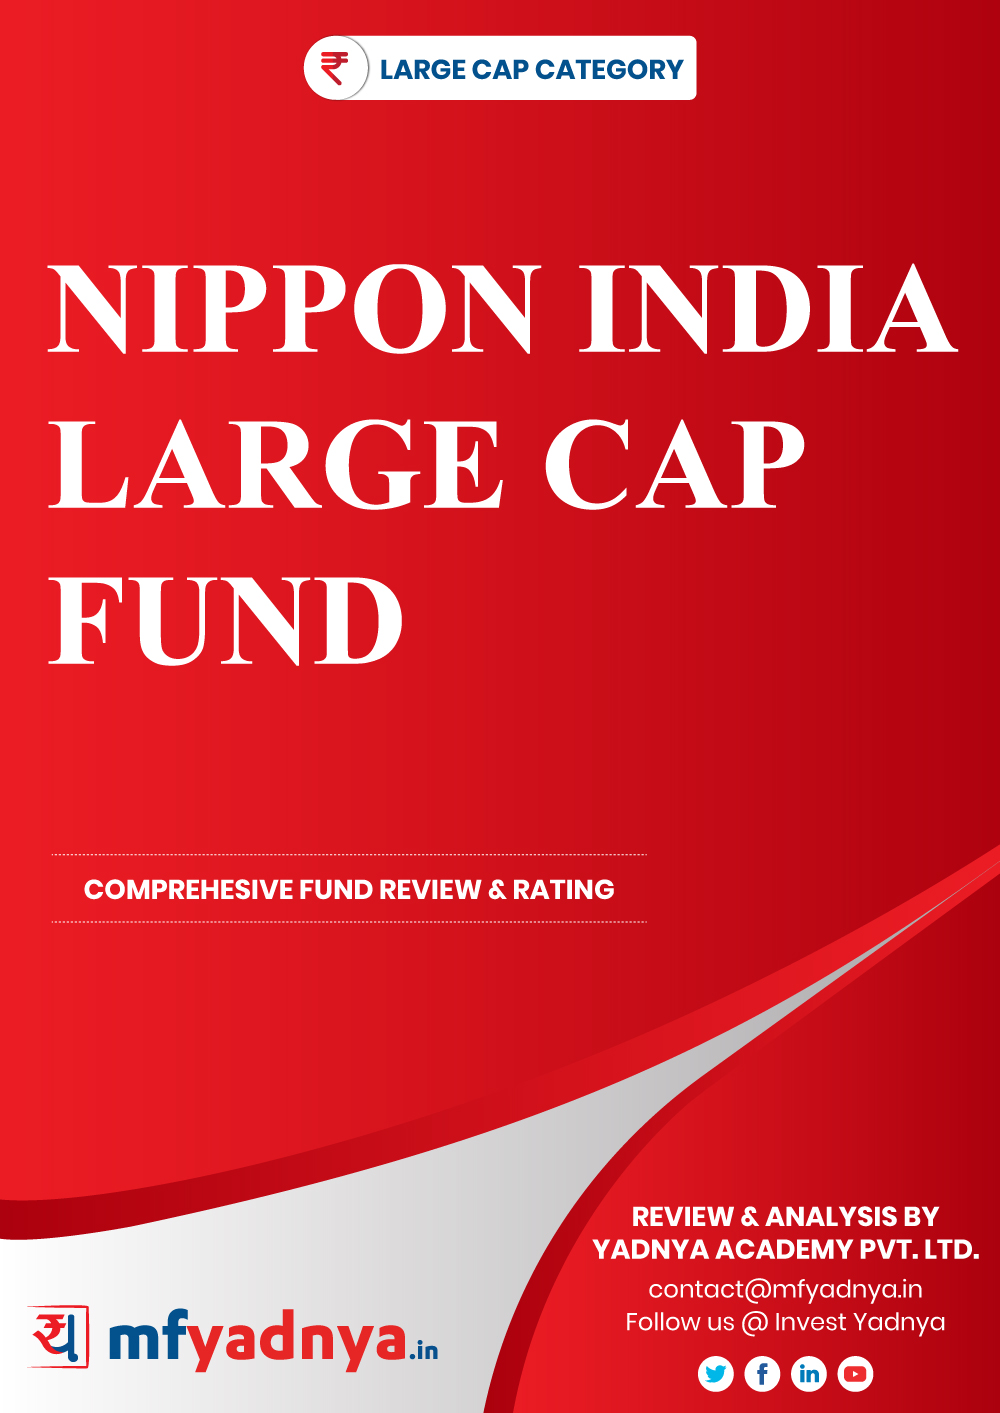 This e-book offers a comprehensive mutual fund review of Nippon India Large Cap Fund. It reviews the fund's return, ratio, allocation etc. ✔ Detailed Mutual Fund Analysis ✔ Latest Research Reports